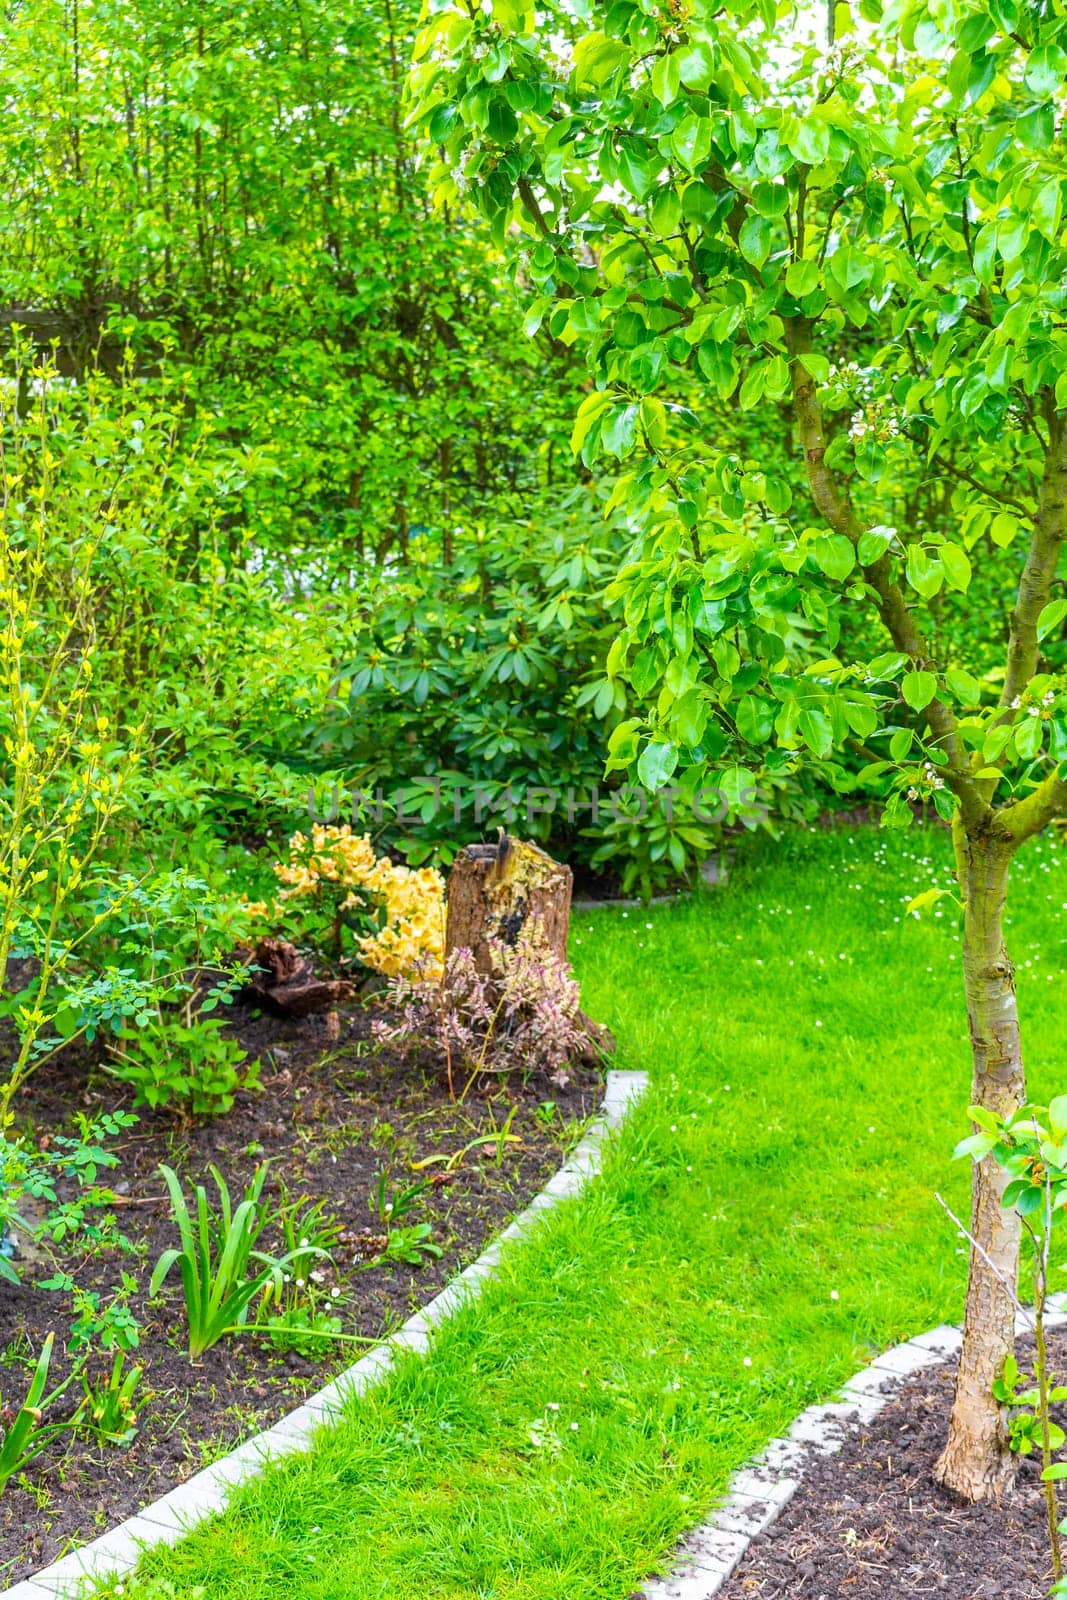 Green Garden with trees plants hut compost beds lawn and barbecue area in Leherheide Bremerhaven Bremen Germany.